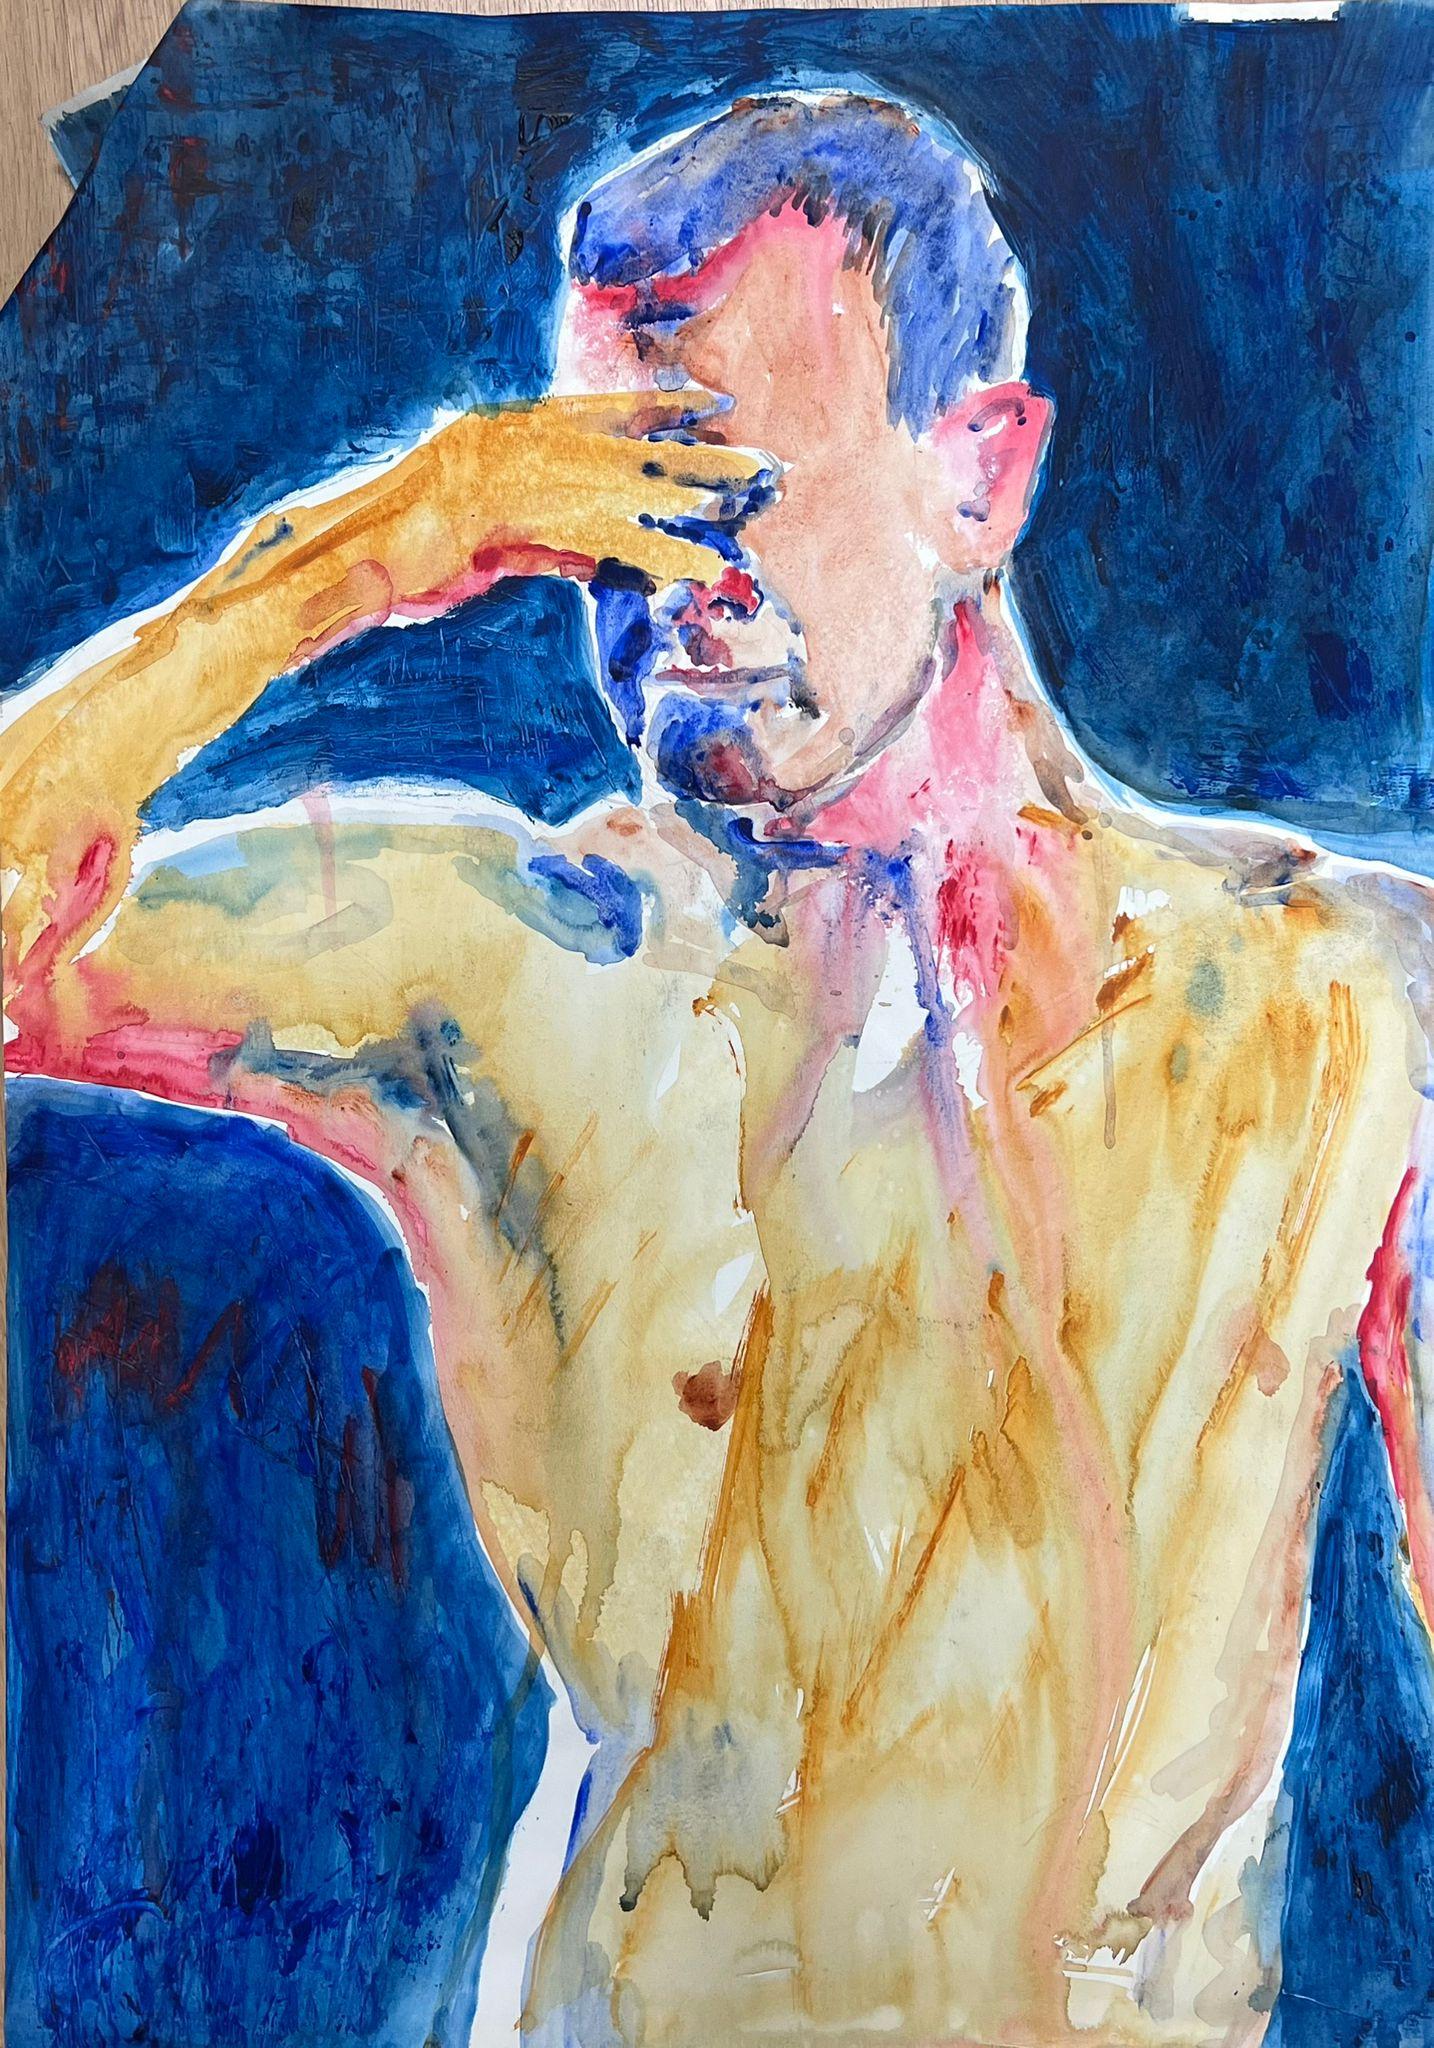 The Male Nude (half length)
by Helen Greenfield (British 20th century) 
oil painting on artist paper, unframed
board: 33 x 23 inches
condition: overall very good - some creasing to the top left corner
provenance: all the paintings we have by this